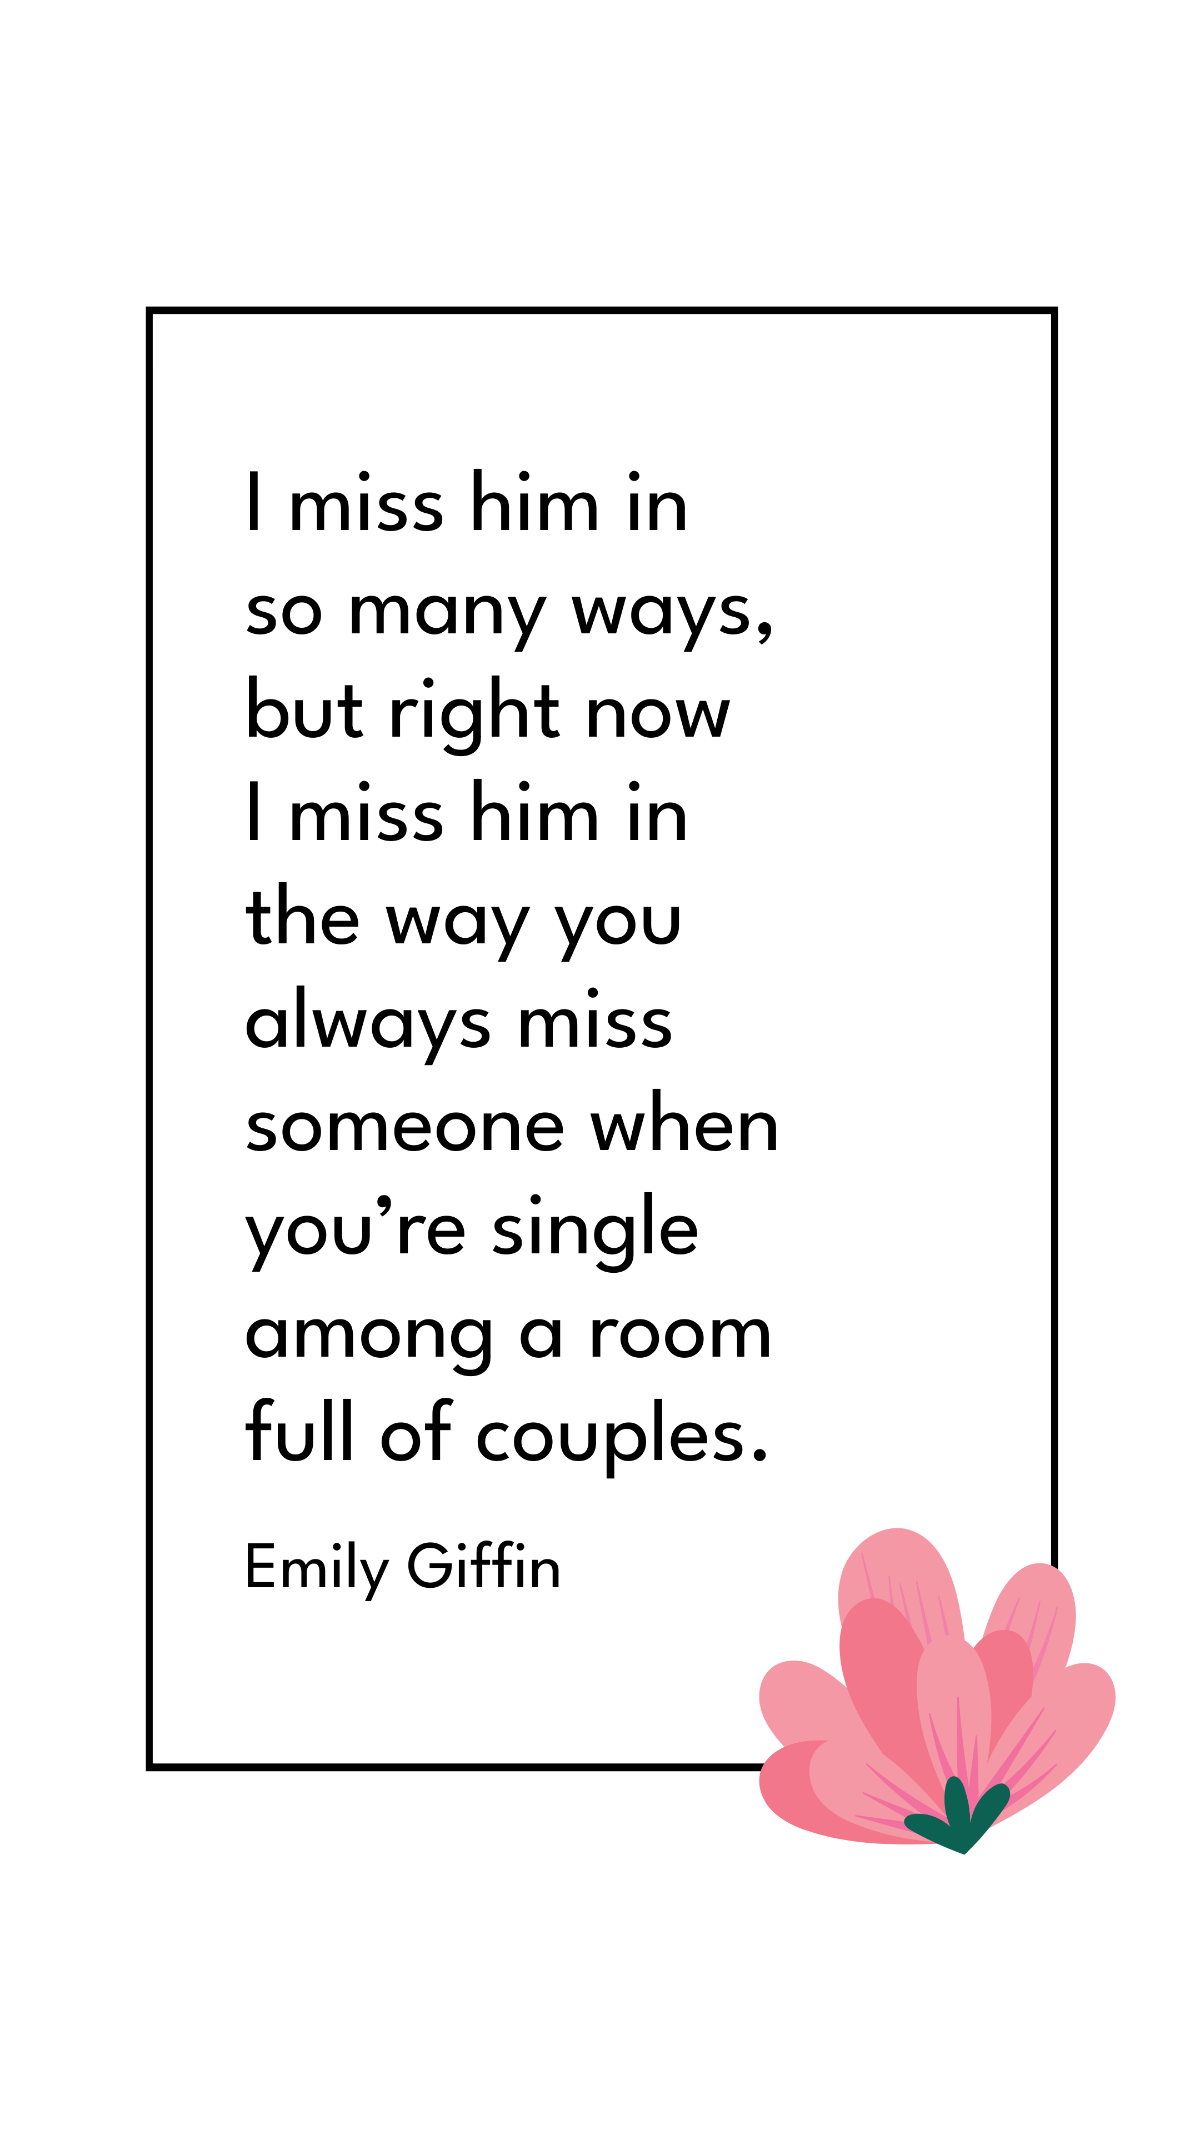 Emily Giffin - I miss him in so many ways, but right now I miss him in the way you always miss someone when you’re single among a room full of couples.